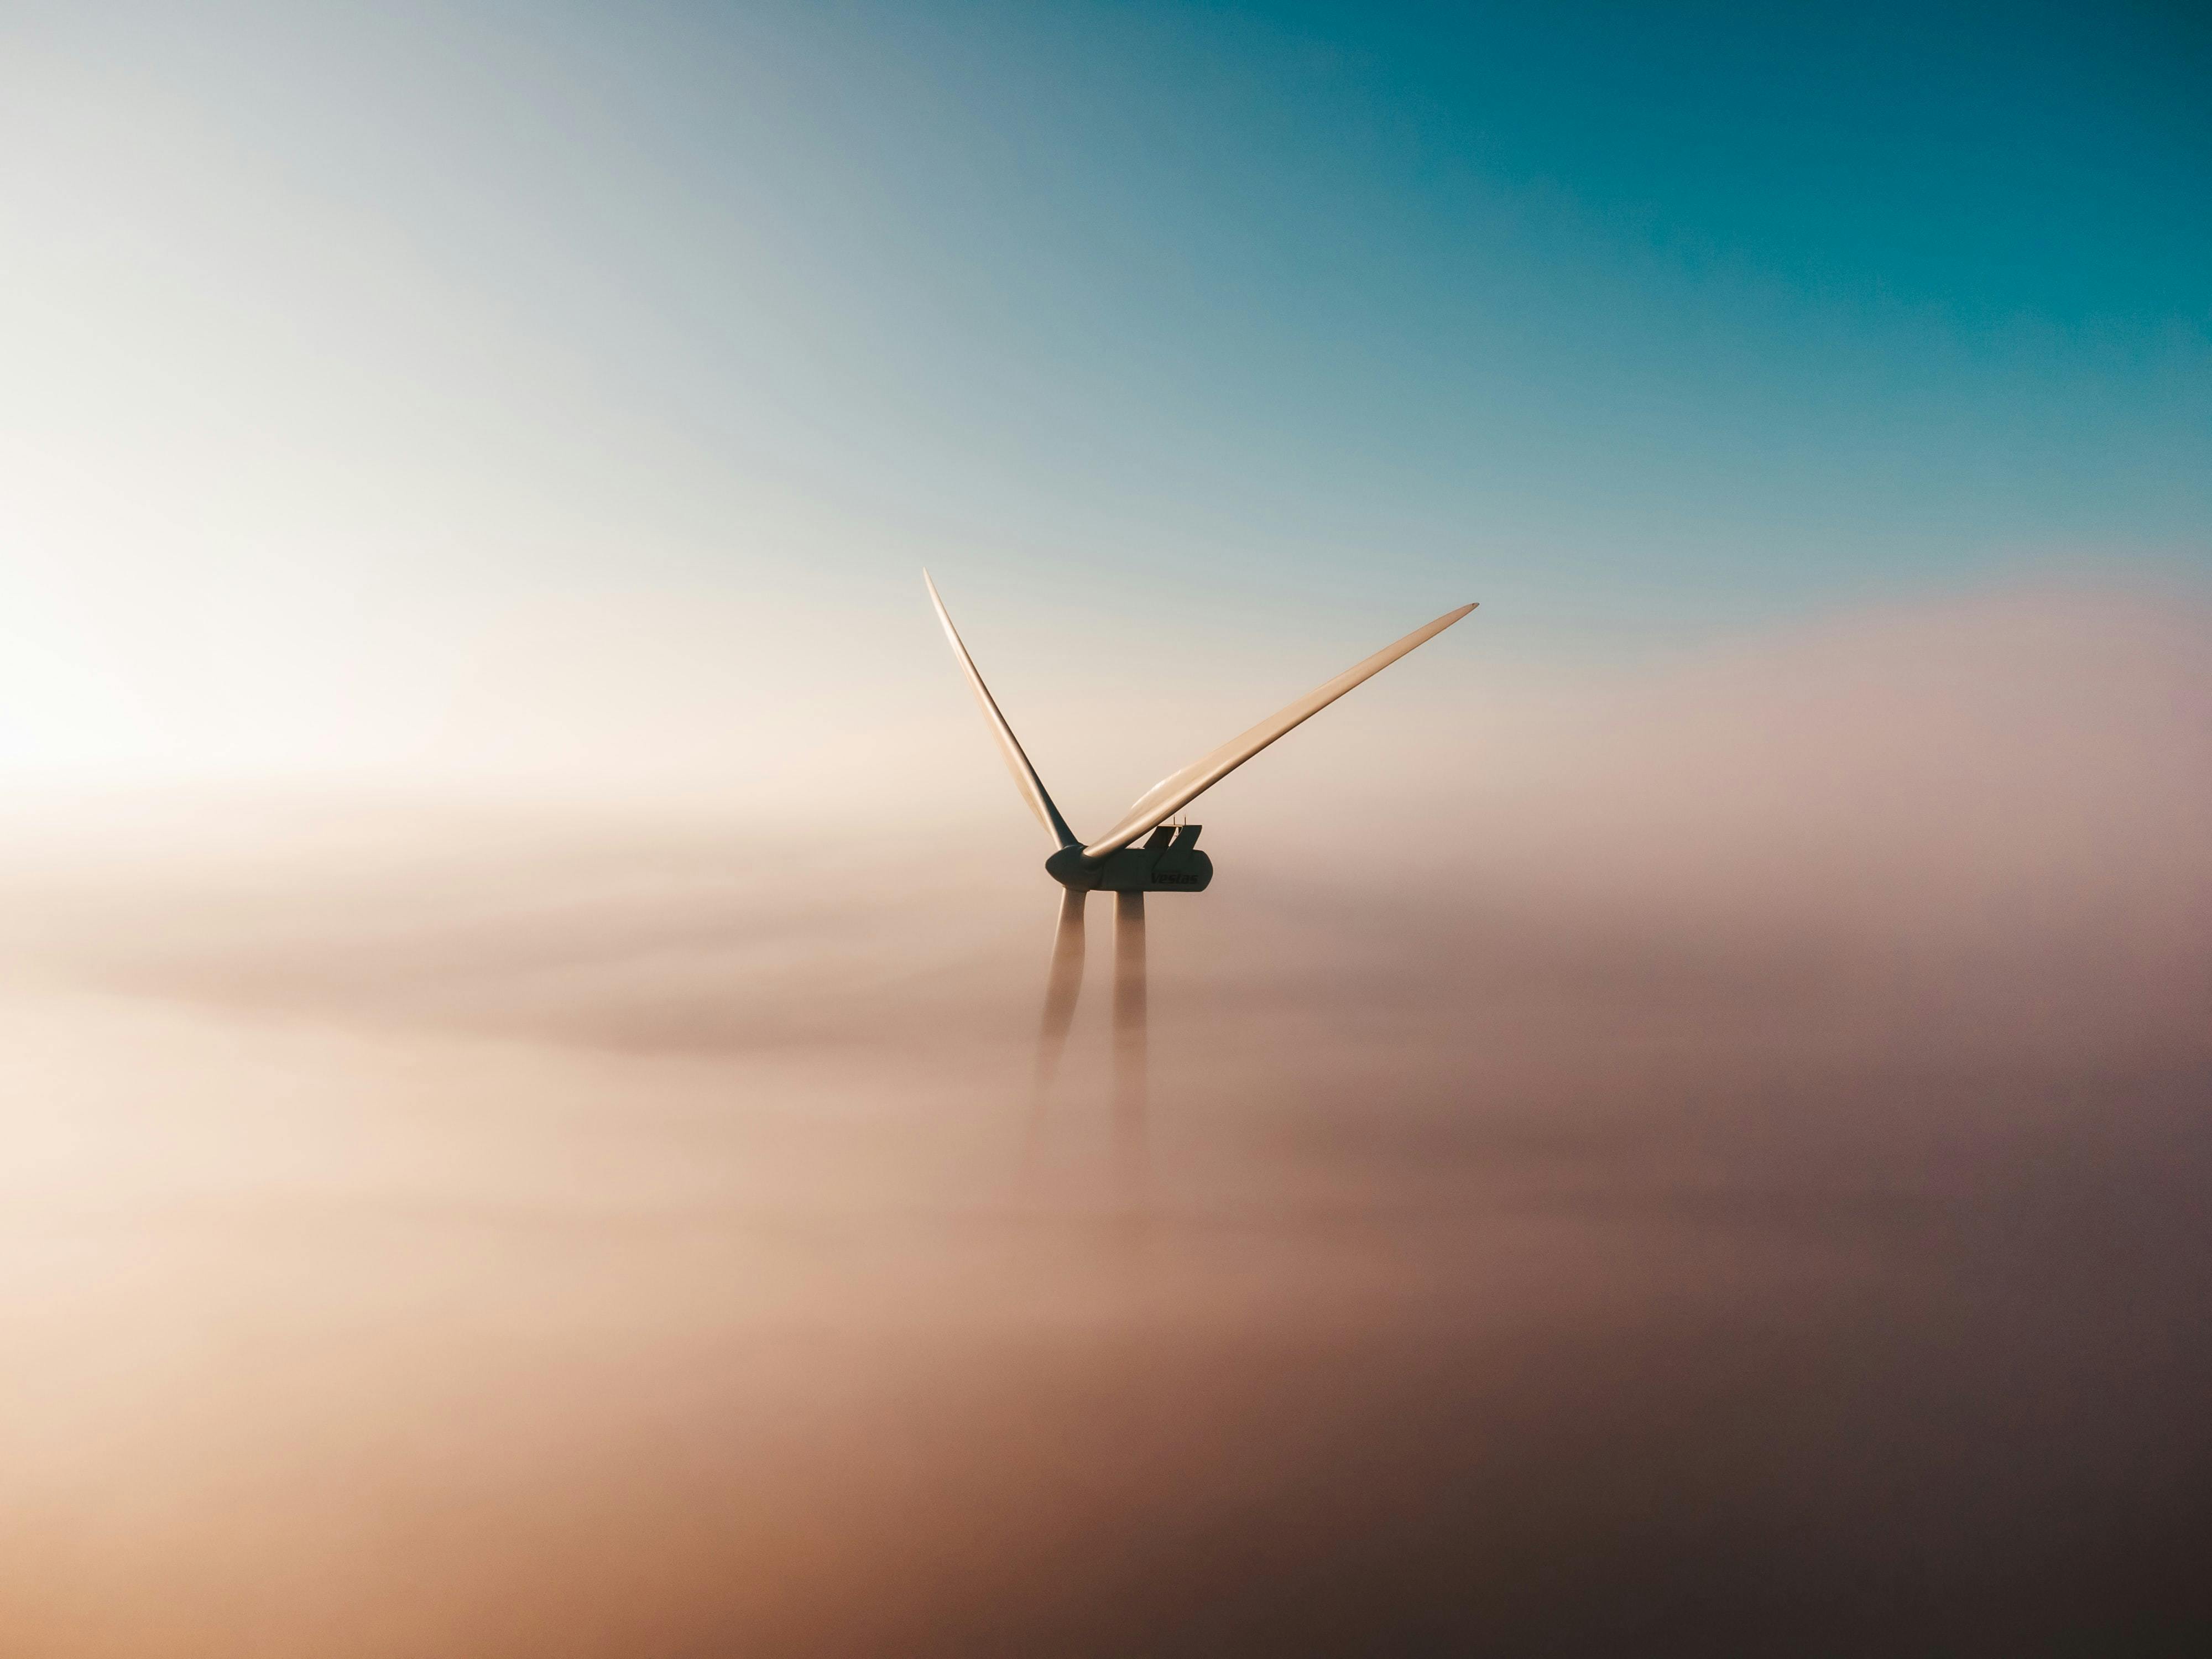 Cover Image Of Renewables 2022 A Photo Of A Wind Turbine Through Soft Hazy Clouds